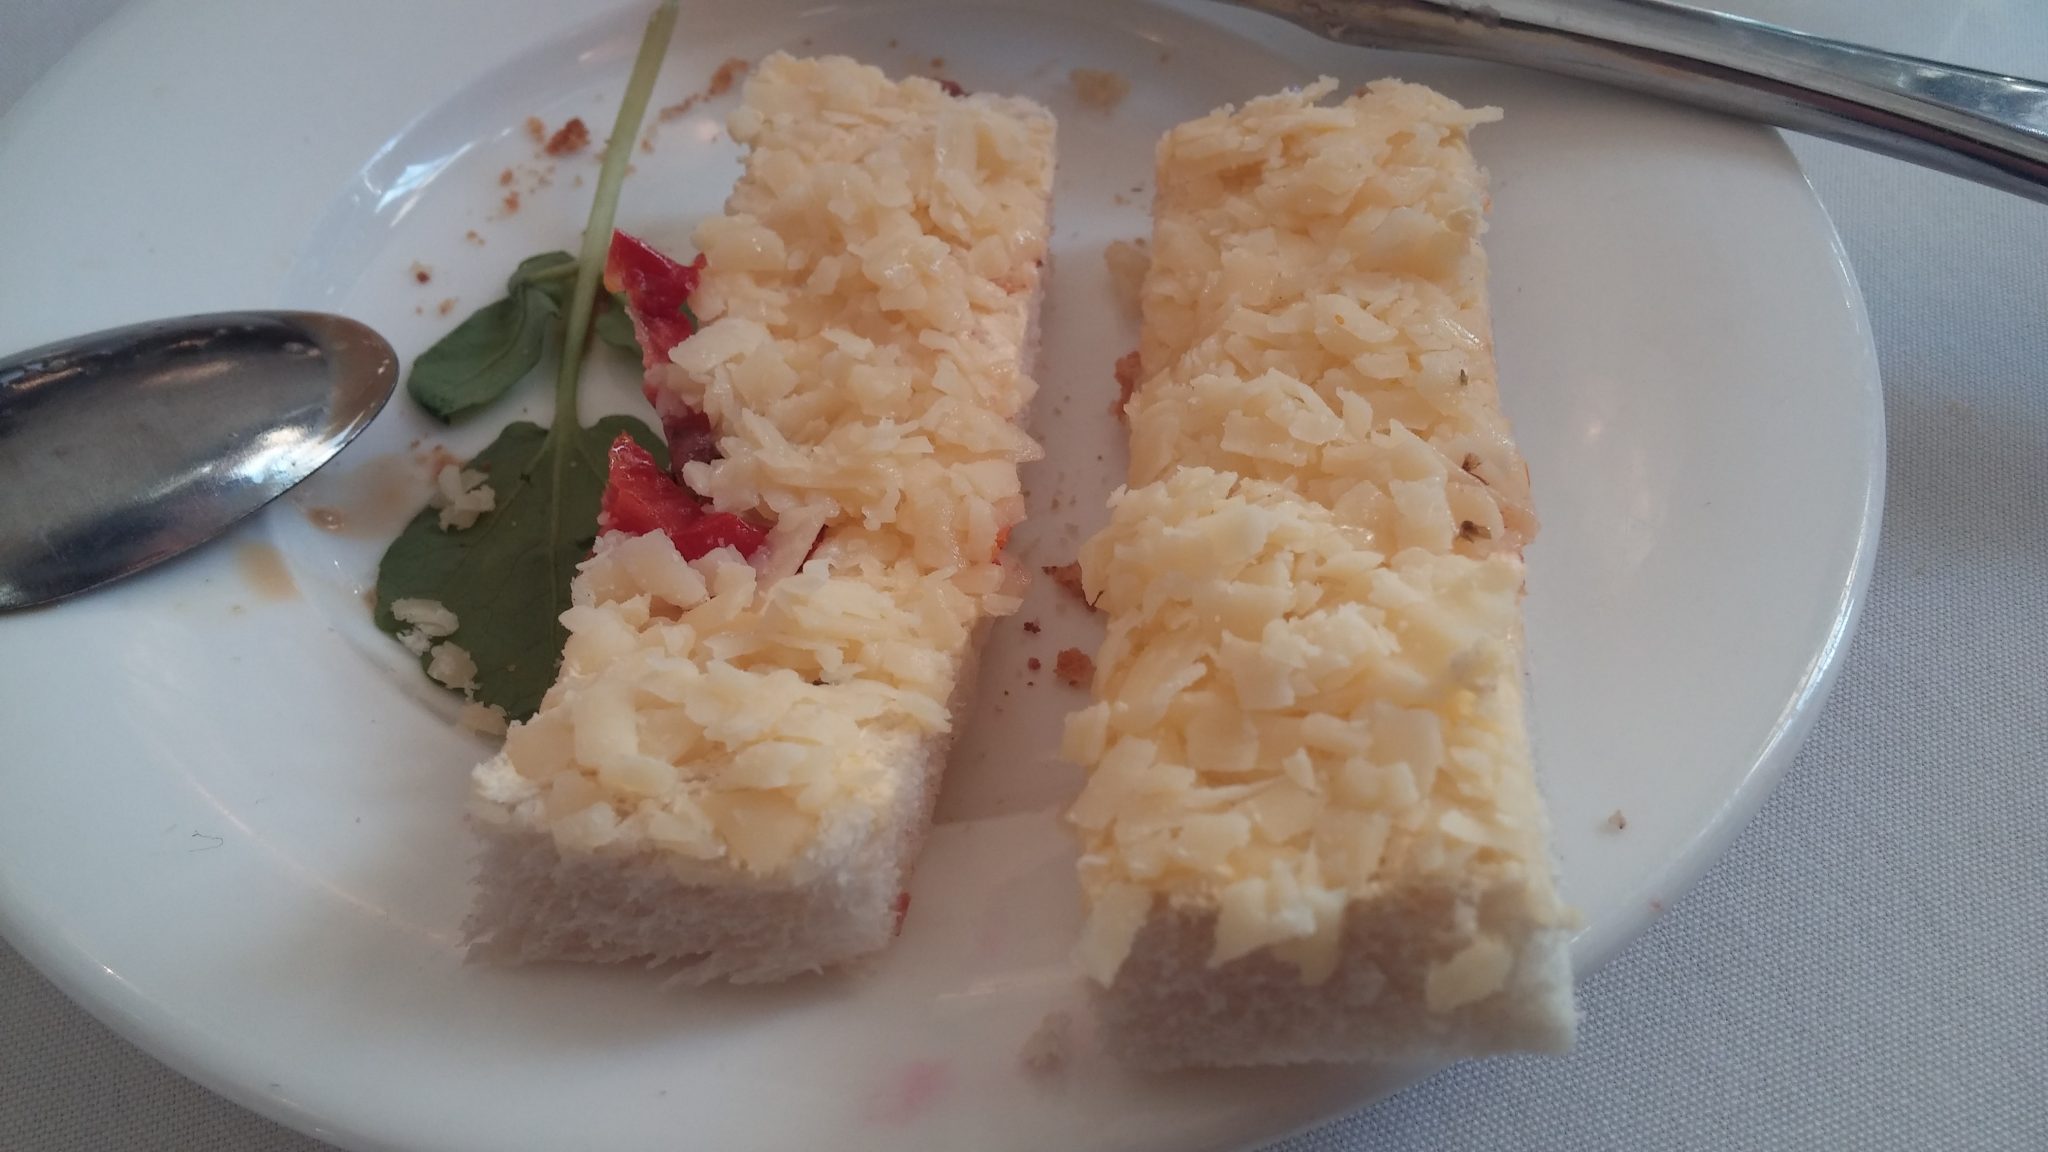 Grated cheese and bitty tomato sandwich on dry bread